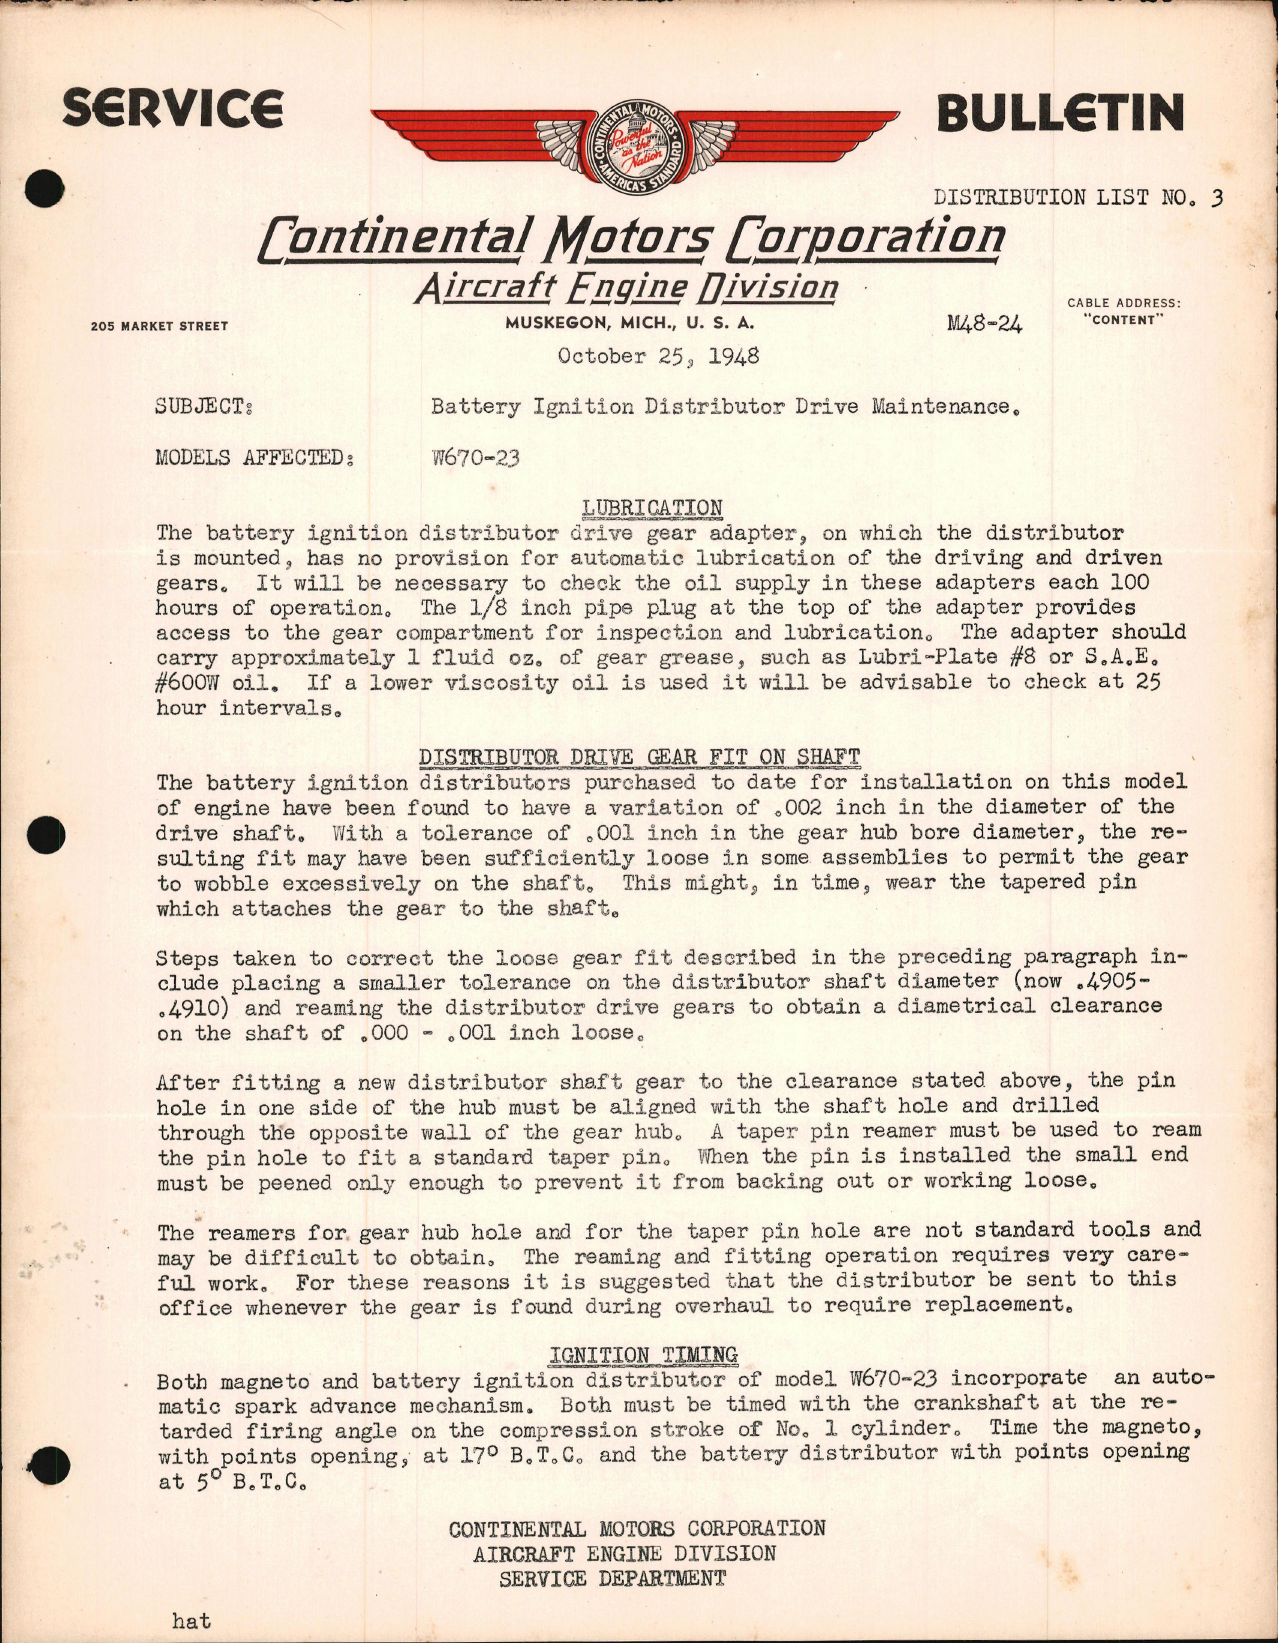 Sample page 1 from AirCorps Library document: Battery Ignition Distributor Drive Maintenance